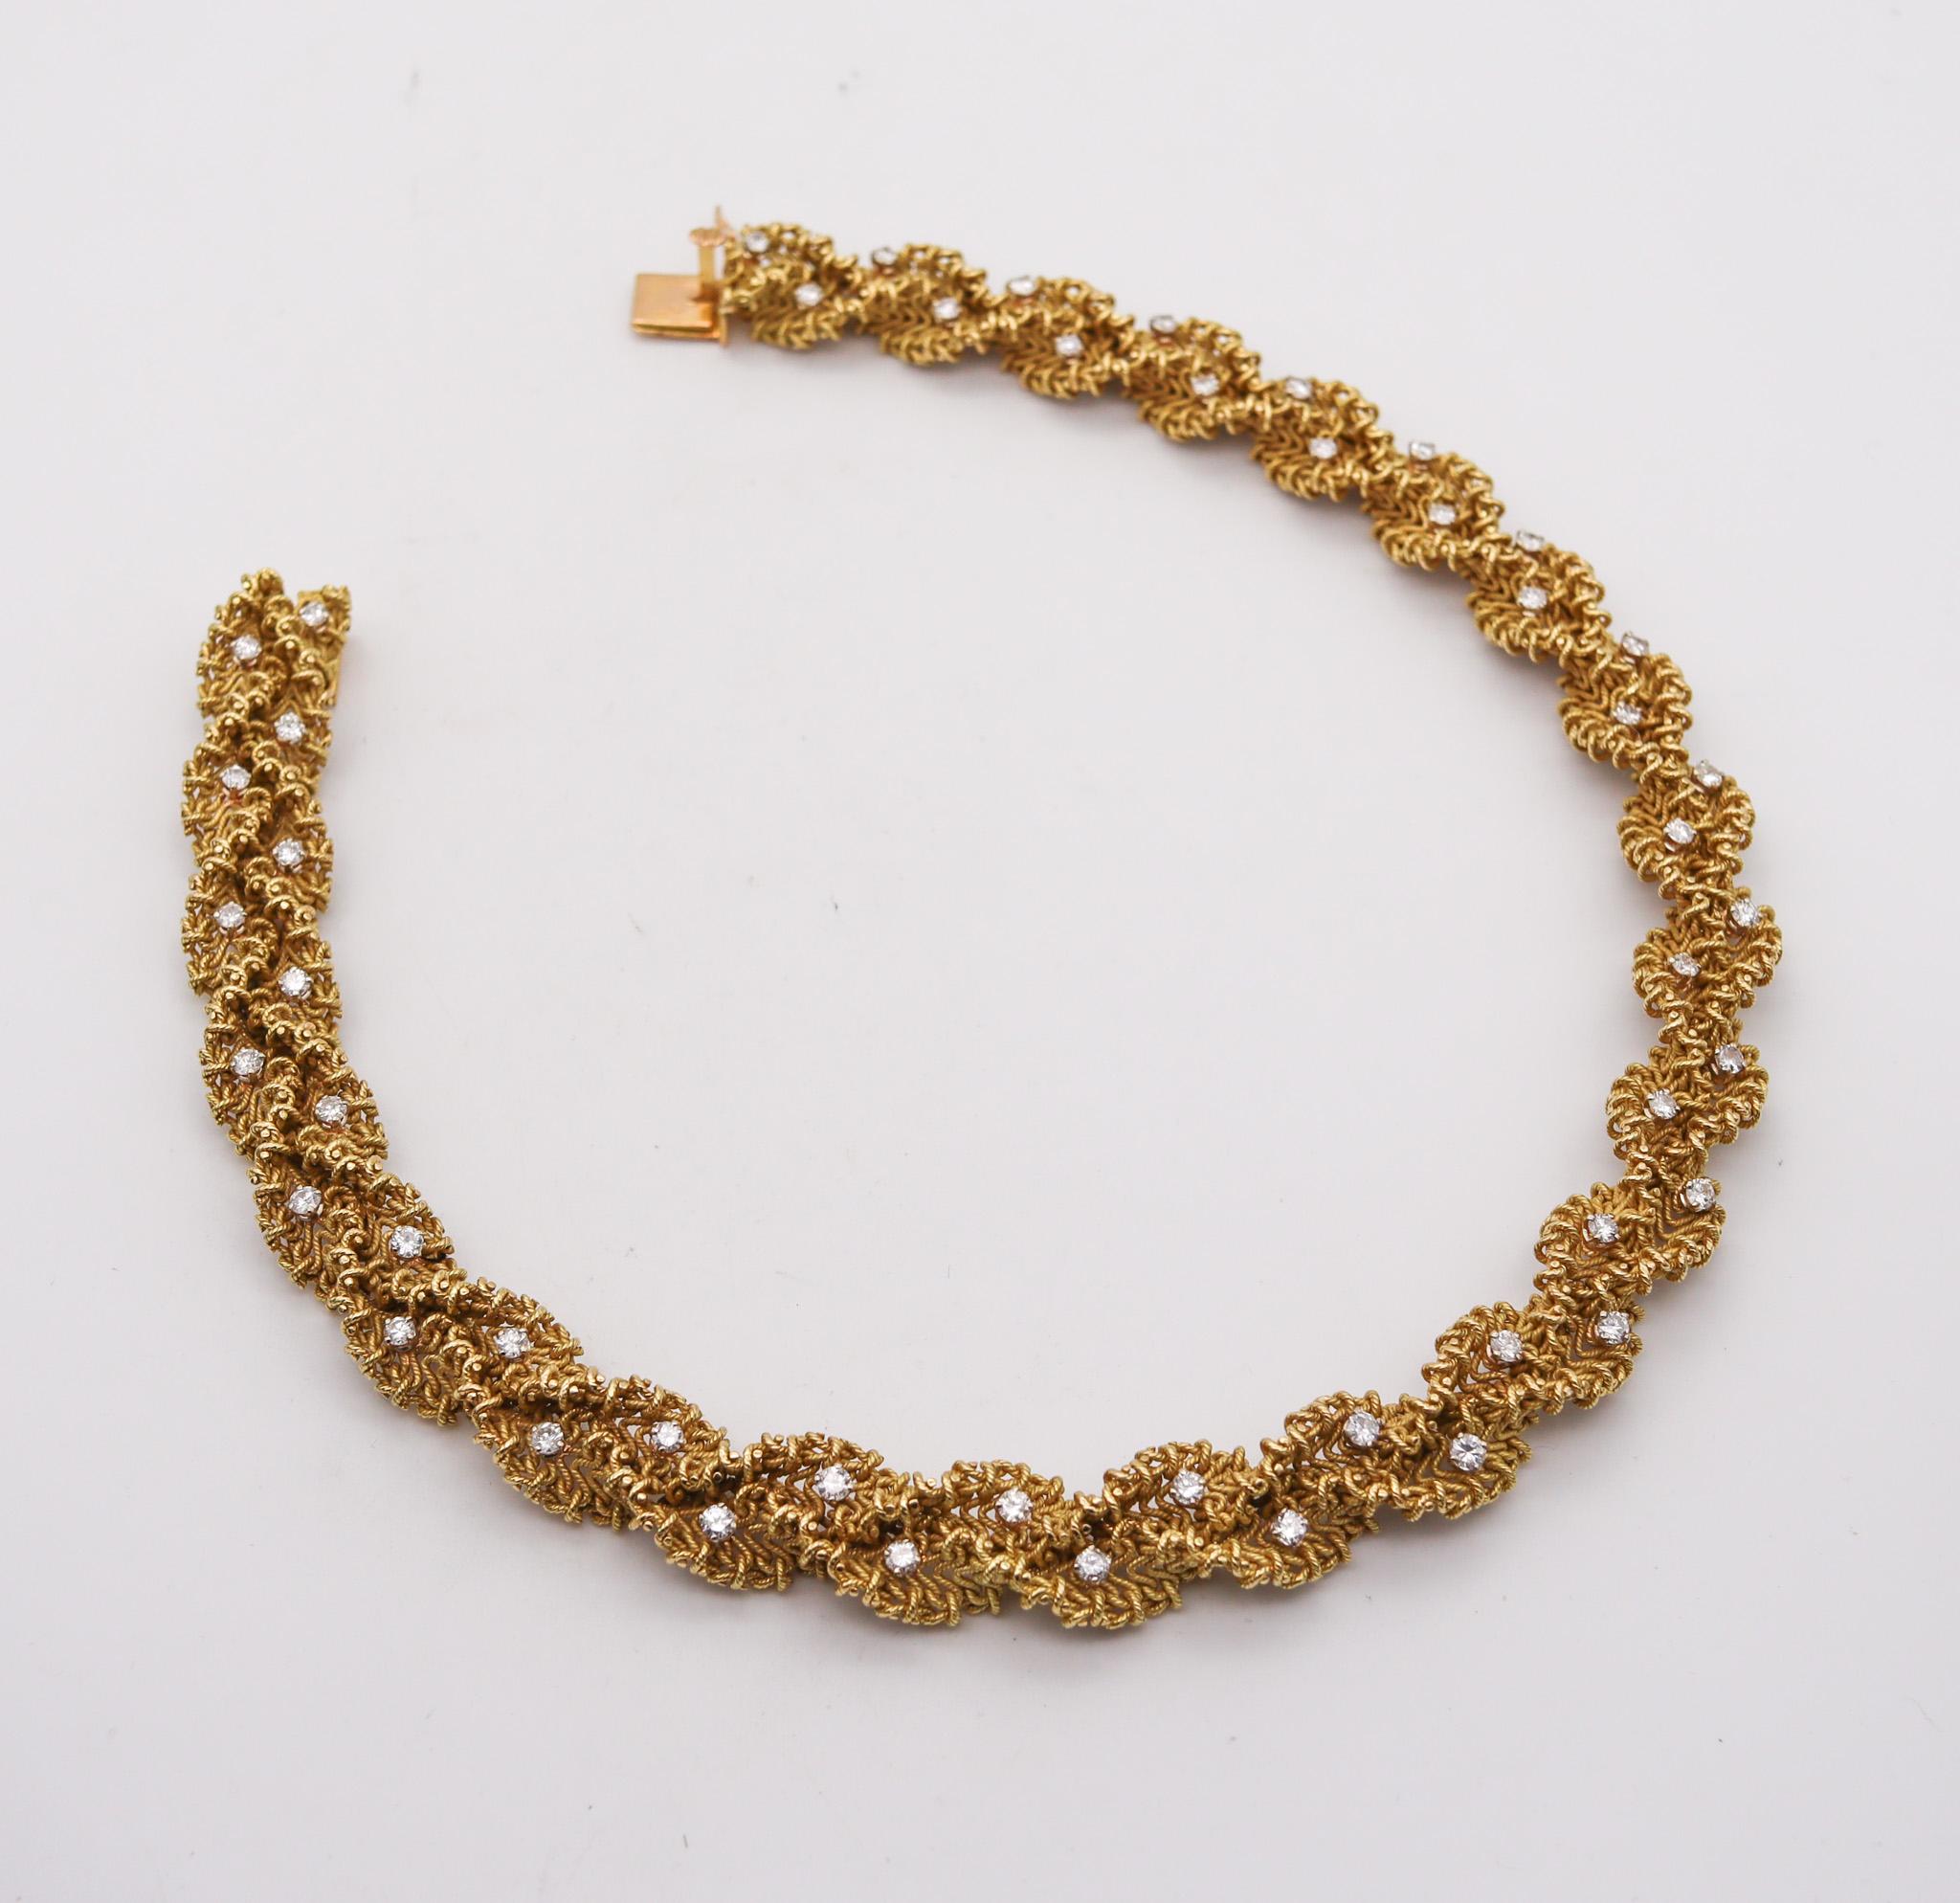 Brilliant Cut Chantecler 1960 Textured Twisted Necklace In 18Kt Gold With 5.15 Ctw In Diamonds